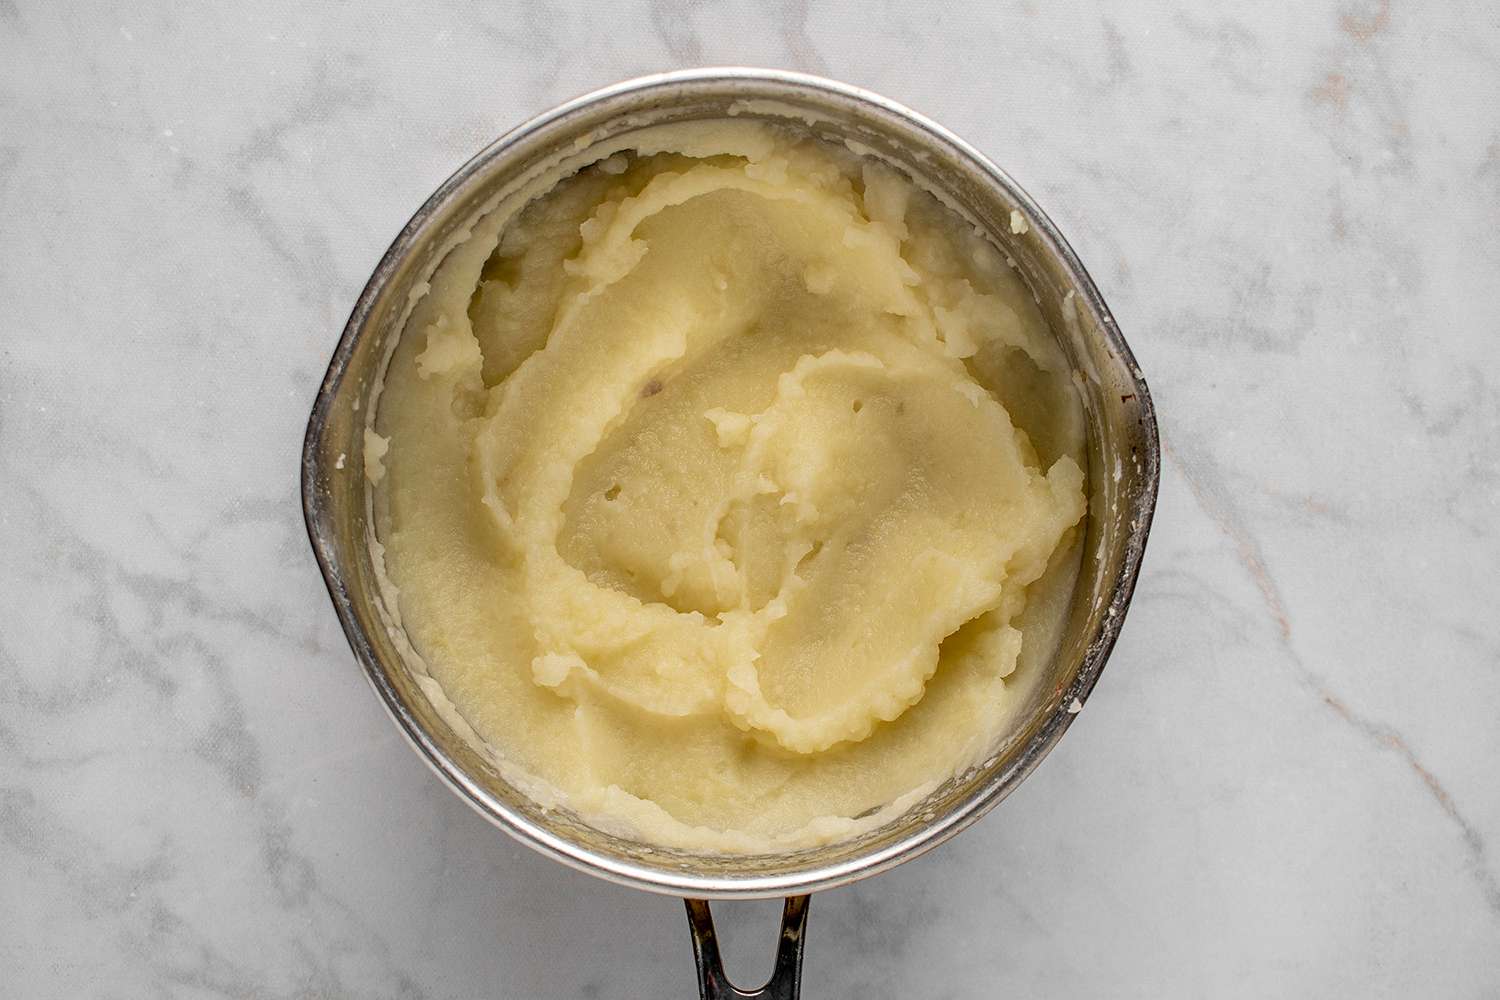 Mashed potatoes in a pot